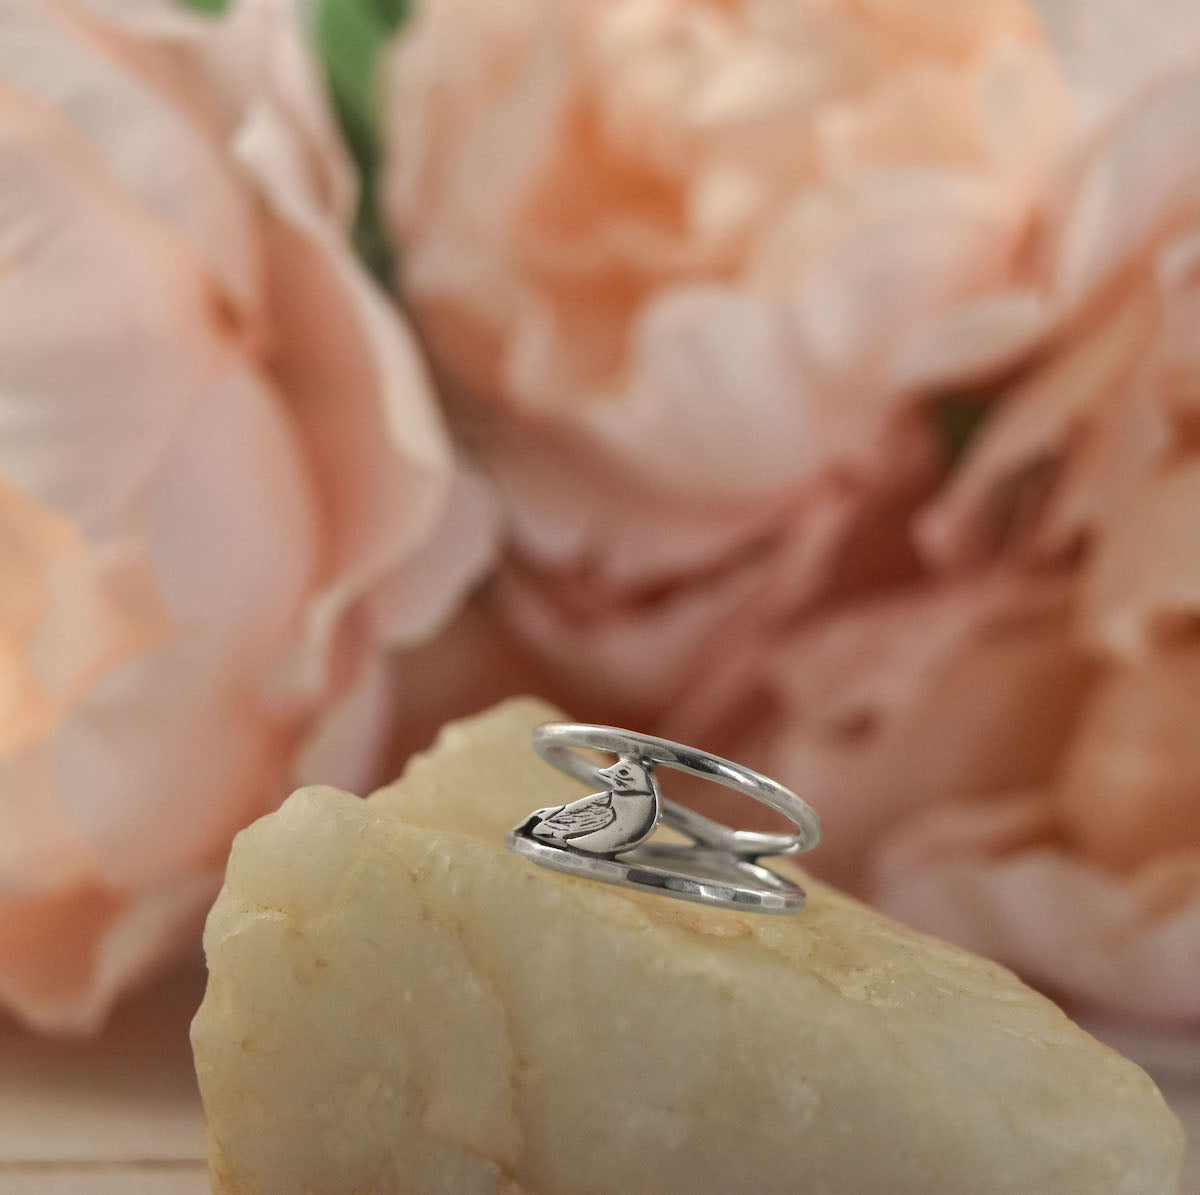 Spring Robin Ring - Ring  Select Size  4 5781 - handmade by Beth Millner Jewelry